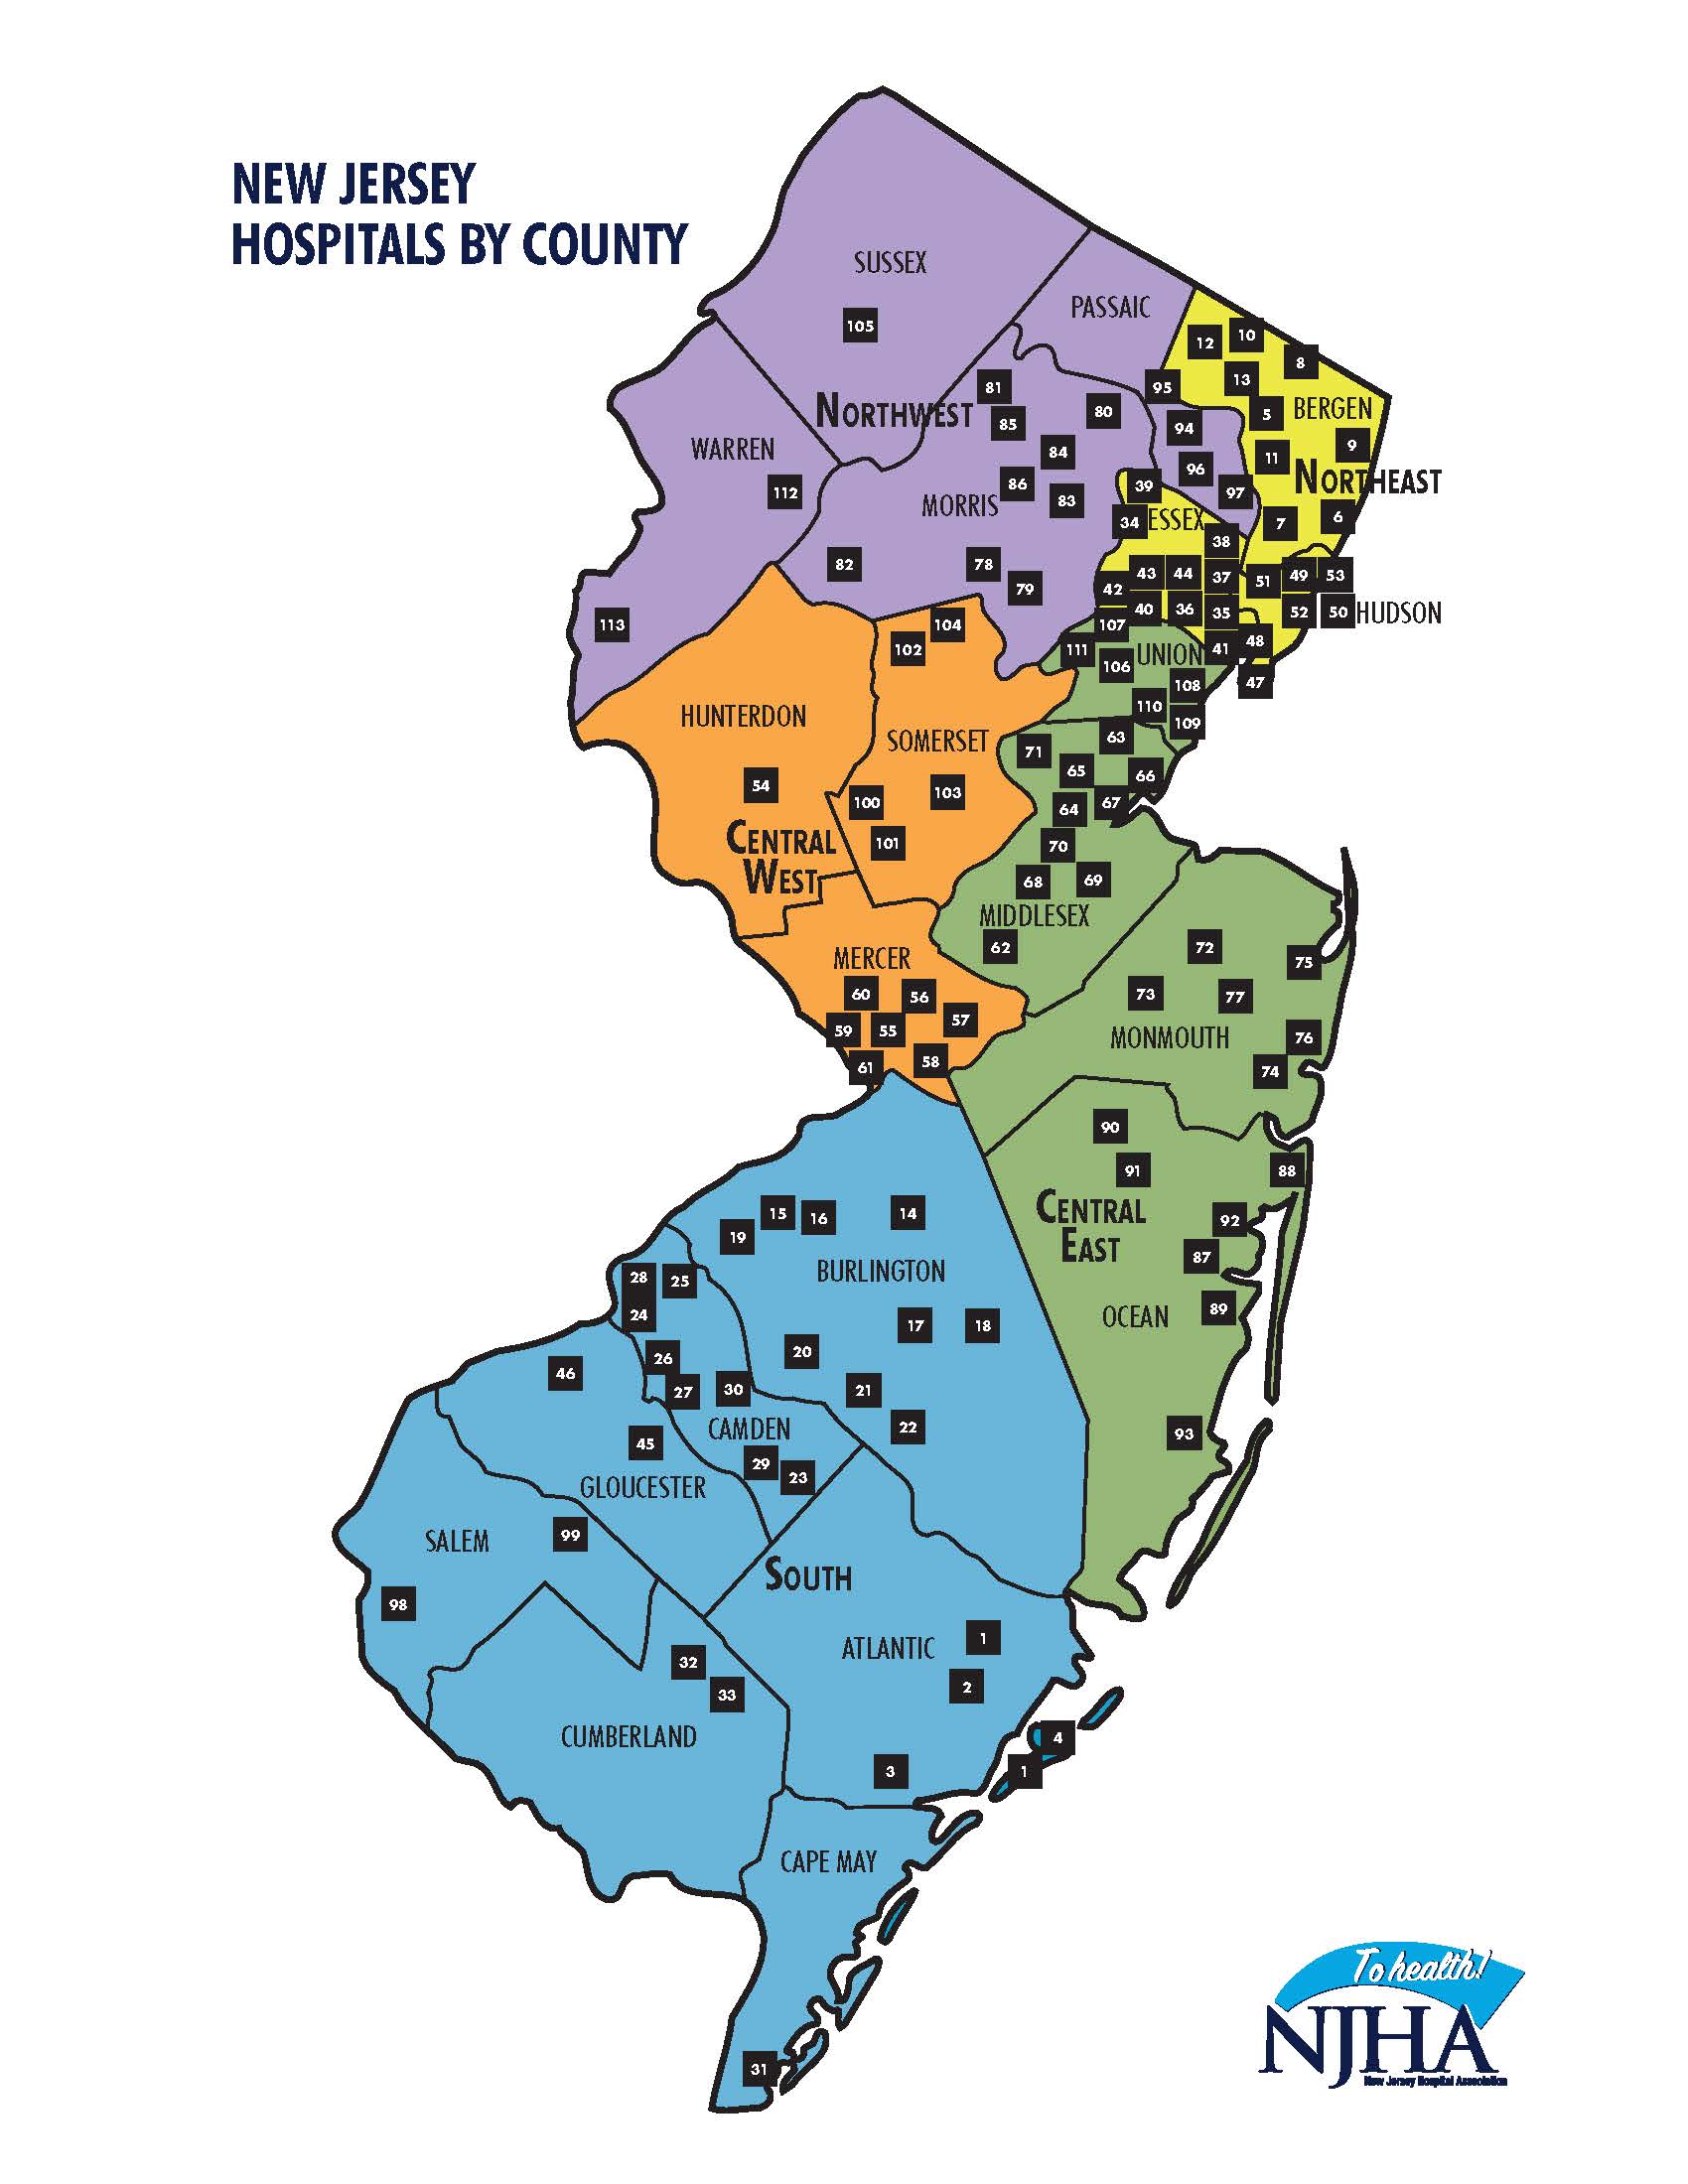 Map of New Jersey hospitals by county